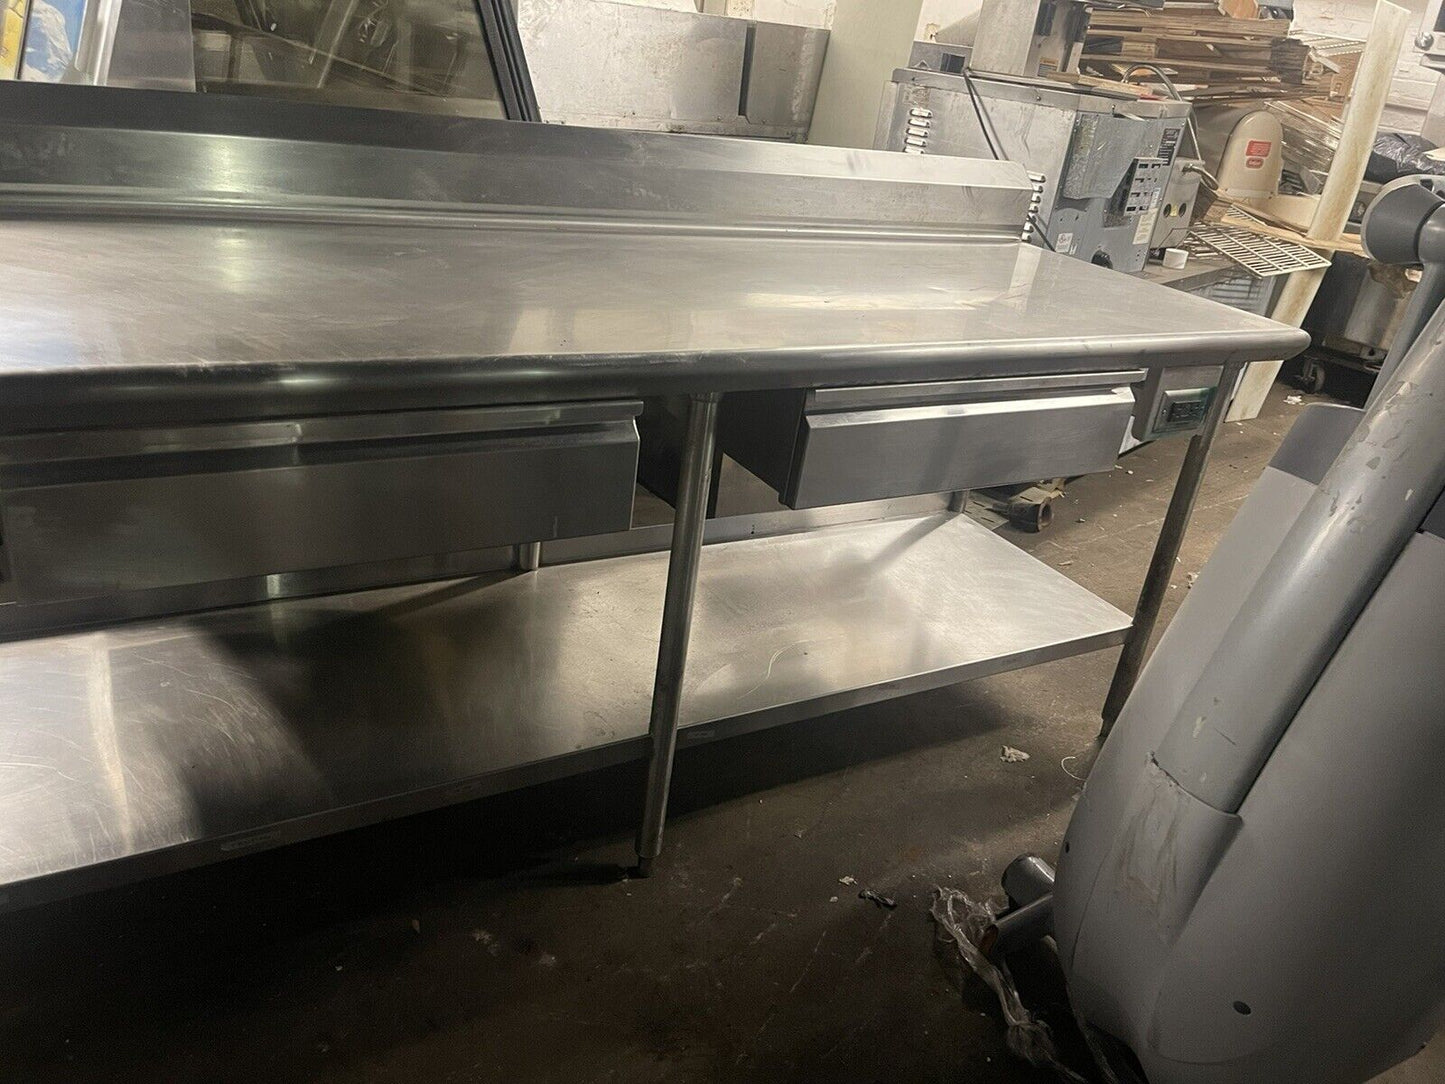 COMMERCIAL STAINLESS STEEL WORK TABLE 91” 2 DRAWERS USED